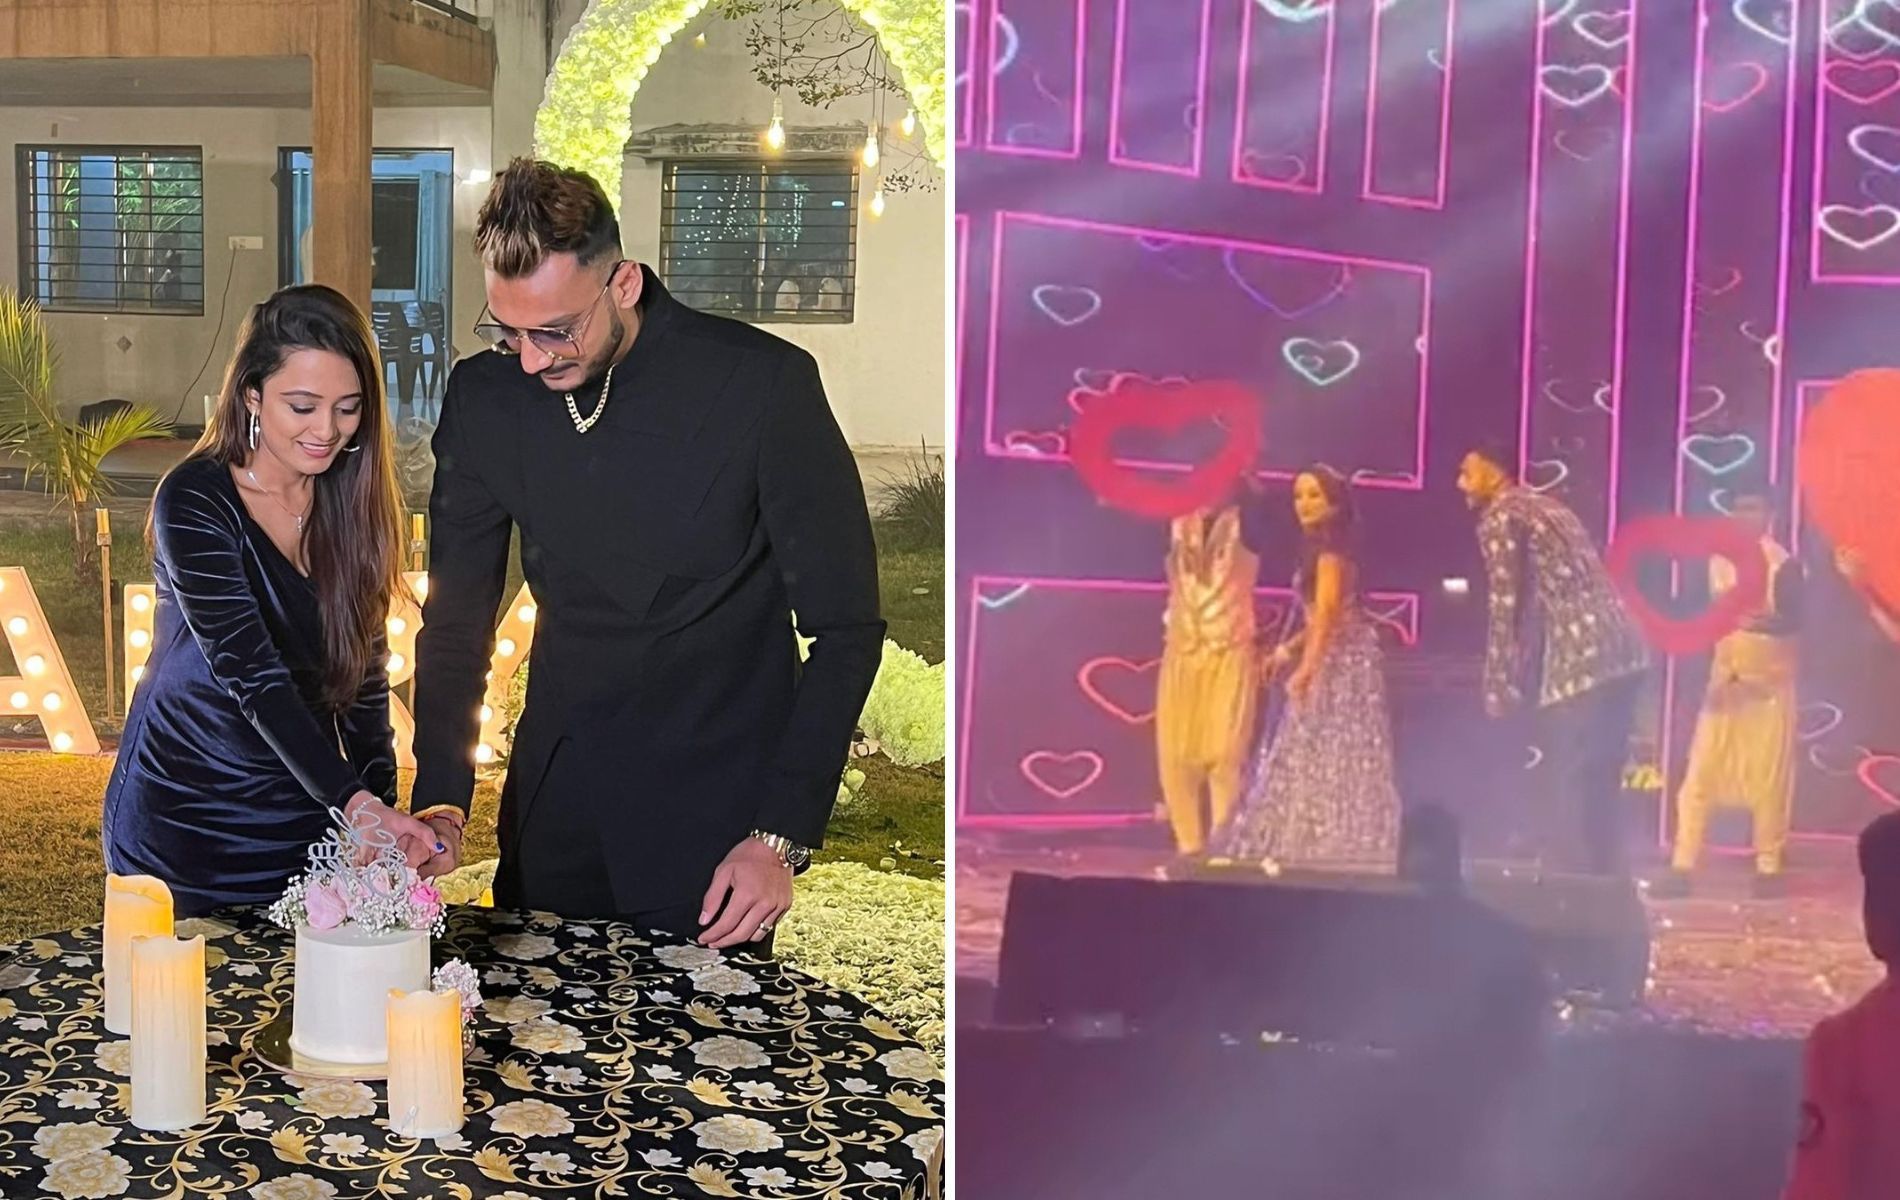 Axar Patel and Meha Patel to get married on January 26. (Pics: Instagram)